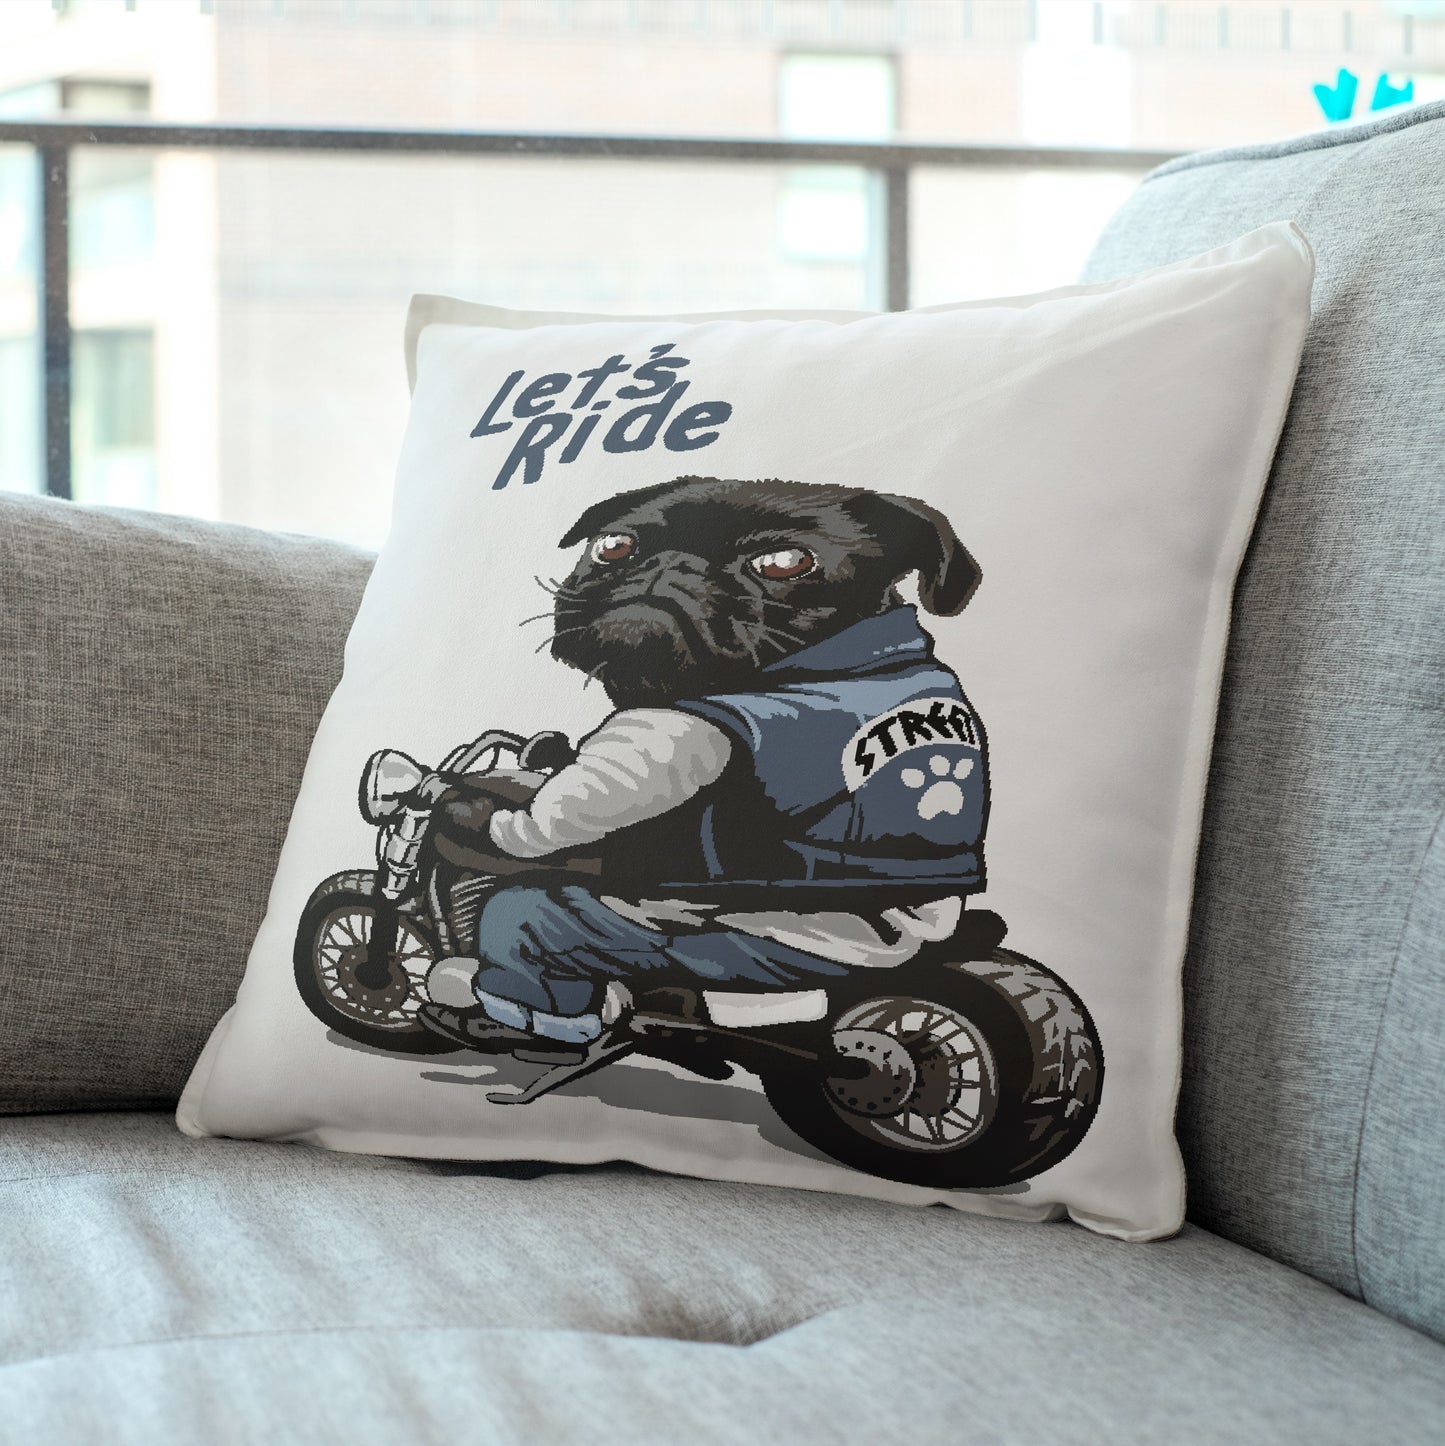 Let's Ride Cushion Cover (Cover & Cushion Both Included)